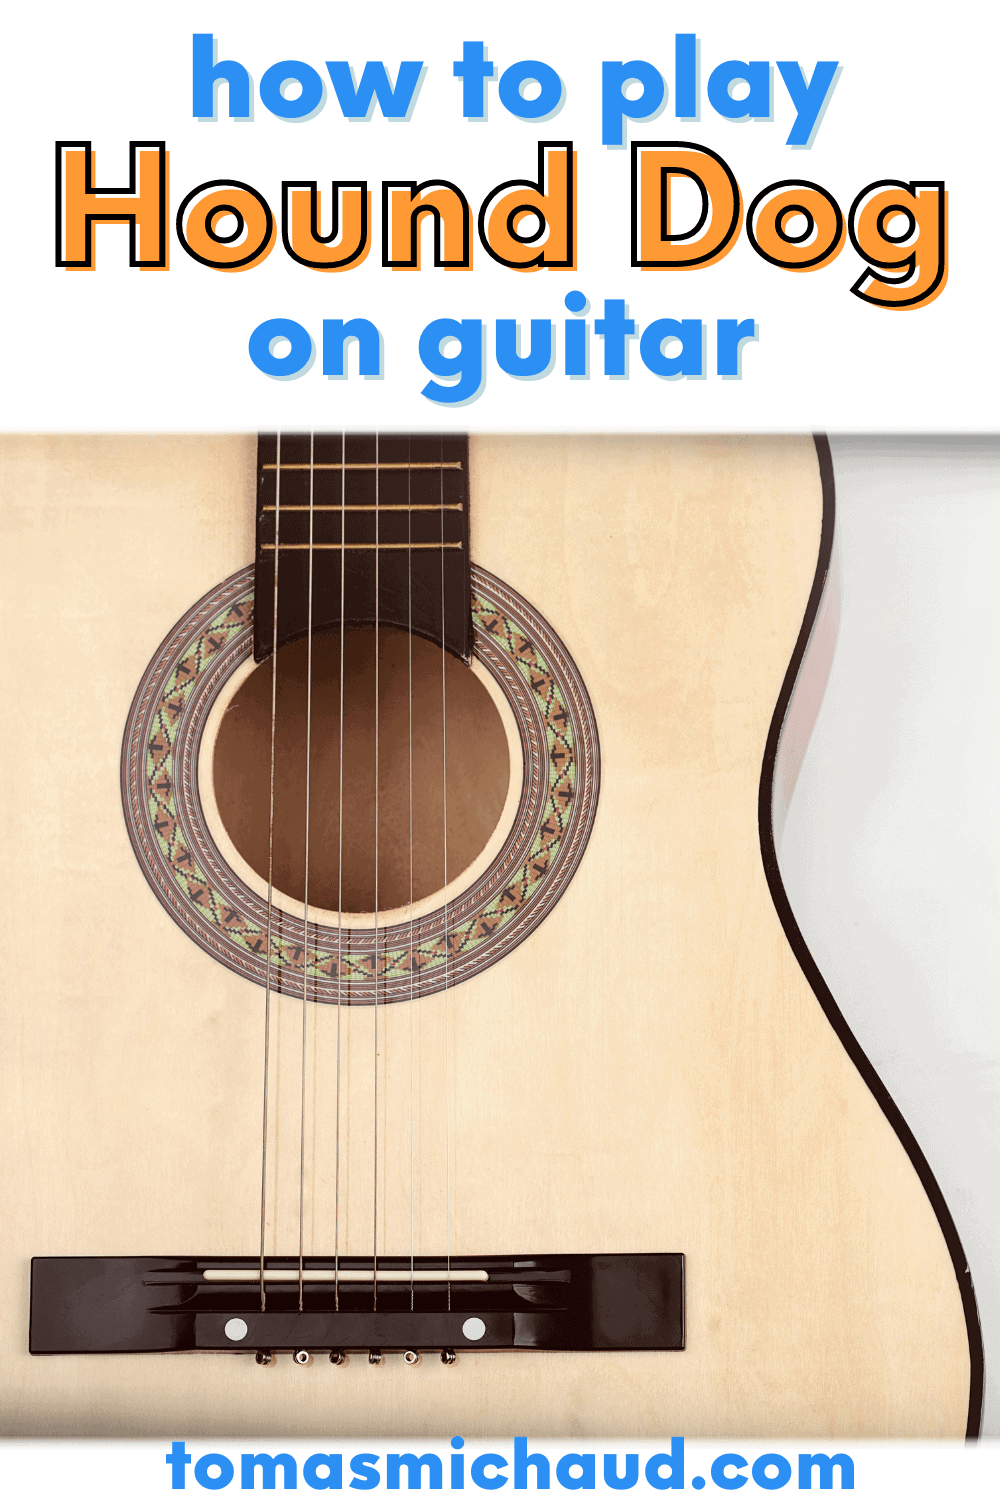 how to play Hound Dog on guitar